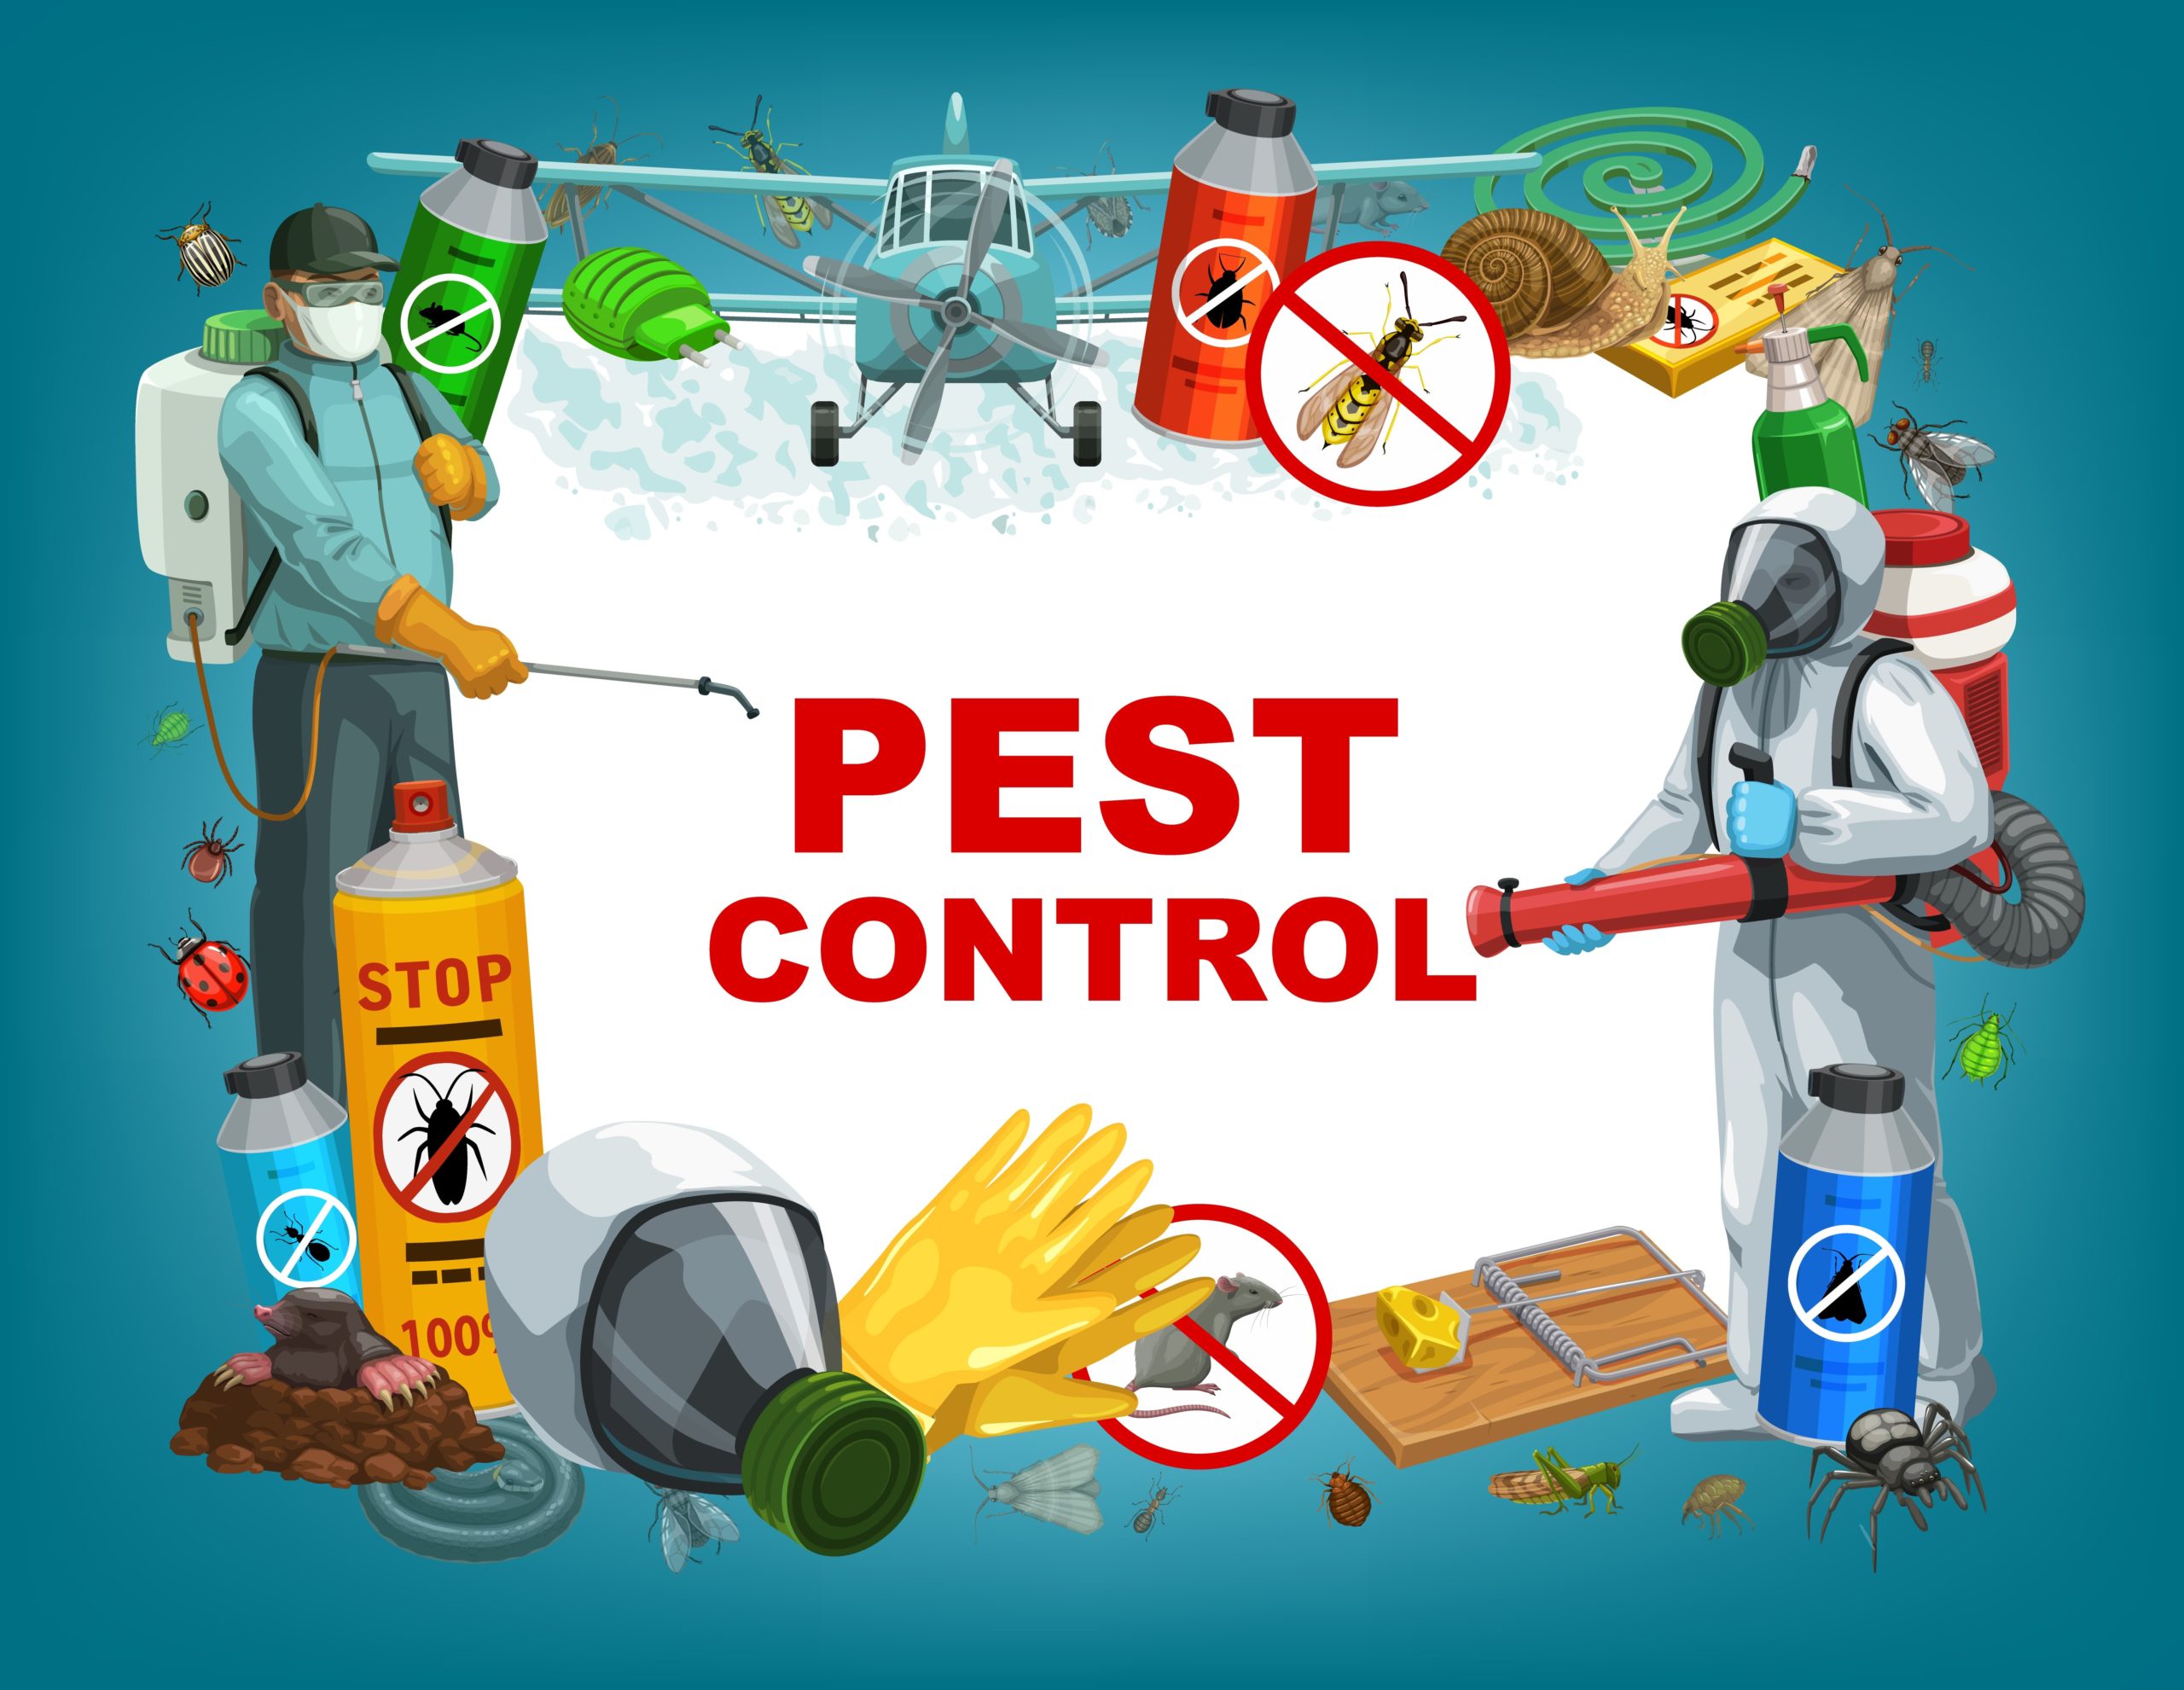 Home remedies for Pest Control